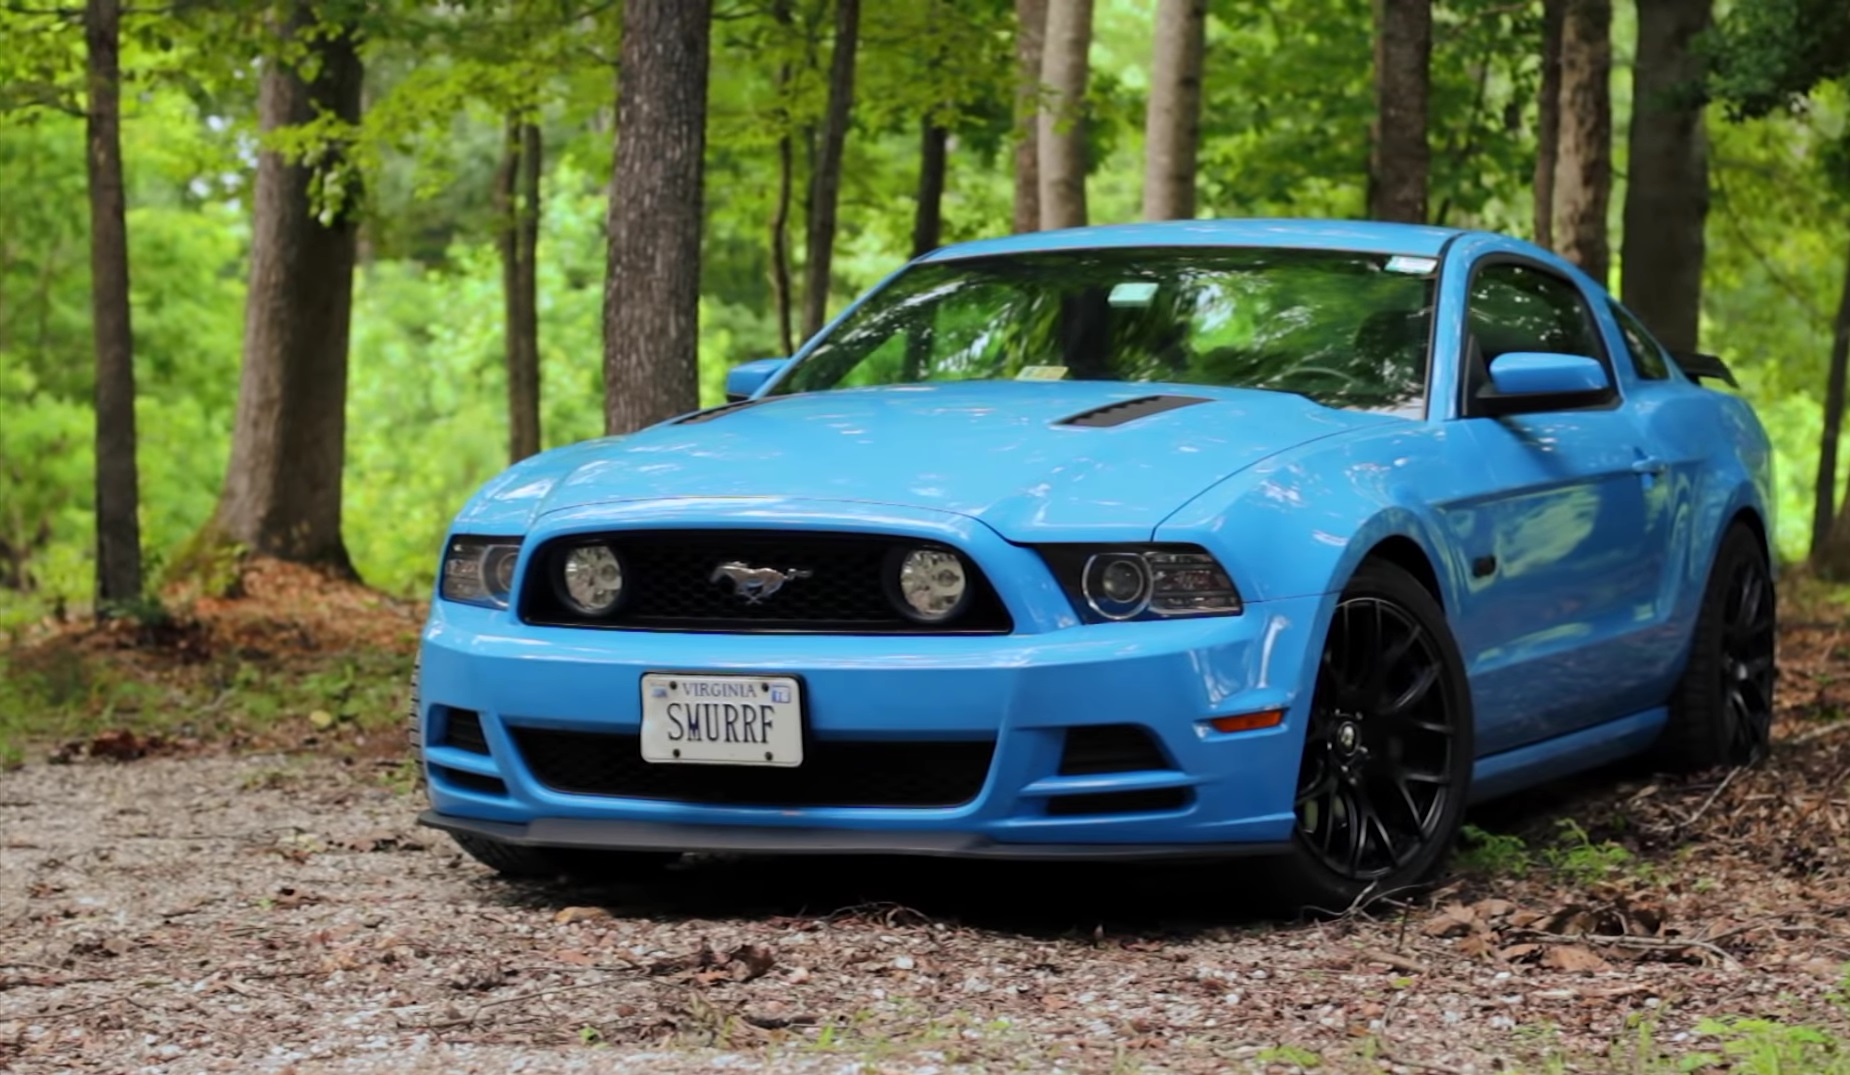 Video: 2013 Ford Mustang GT 70,000 Miles Later